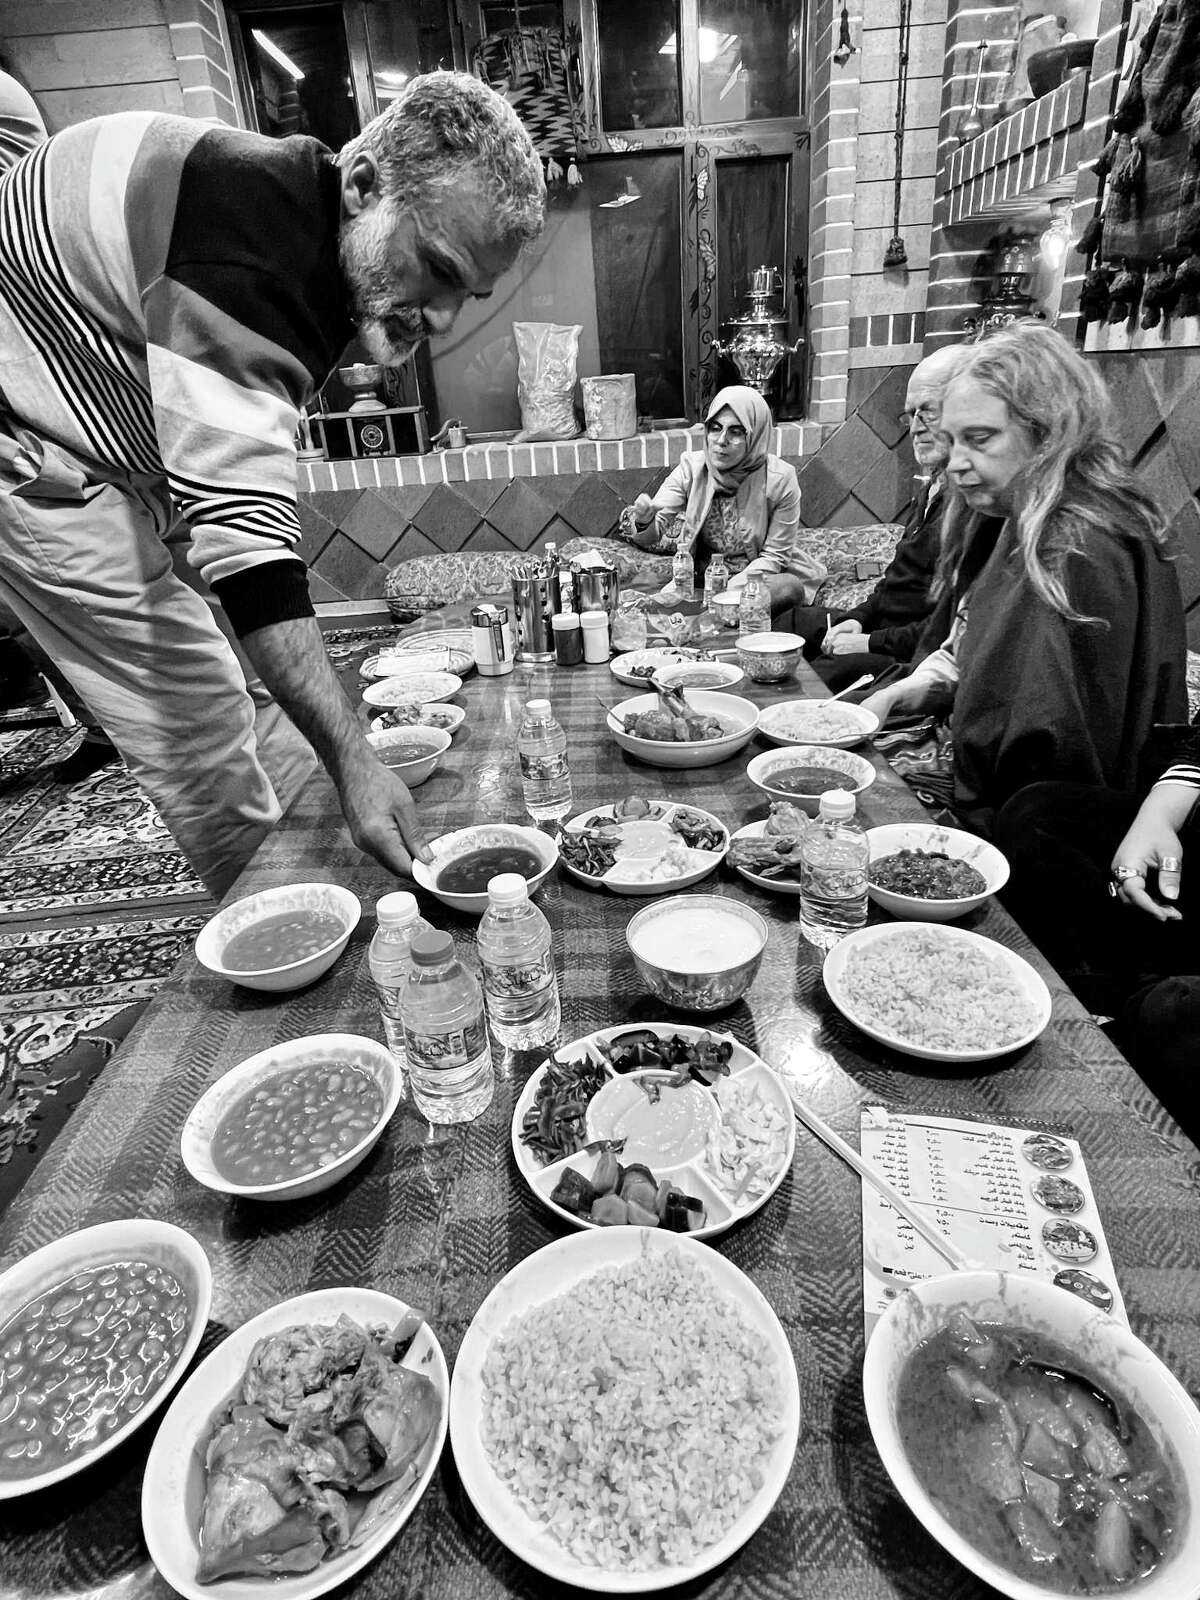 Yassin lays out a spread of food, Kurdish style, for the Capital Region supporters who visited him in Kurdistan in January 2023.